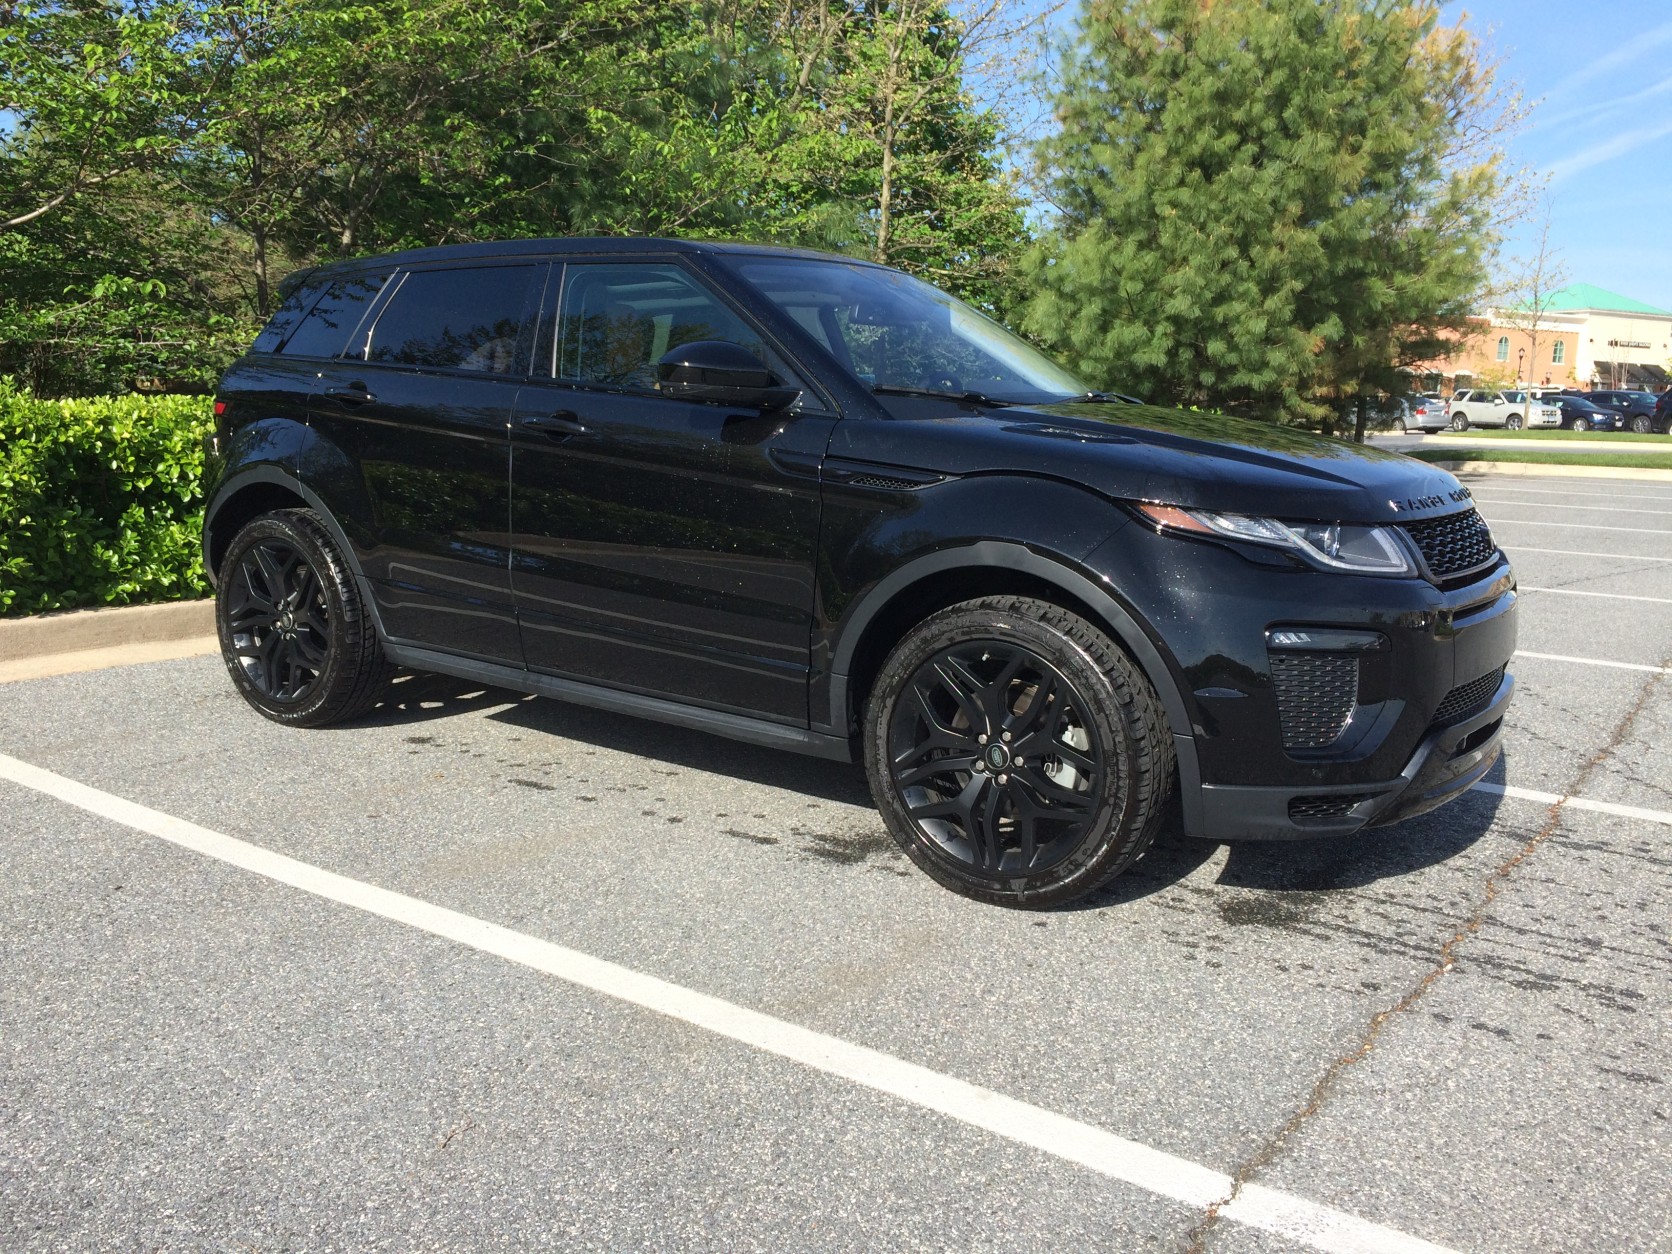 The 2016 Range Rover Evoque is a stylish small crossover. (WTOP/Mike Parris)